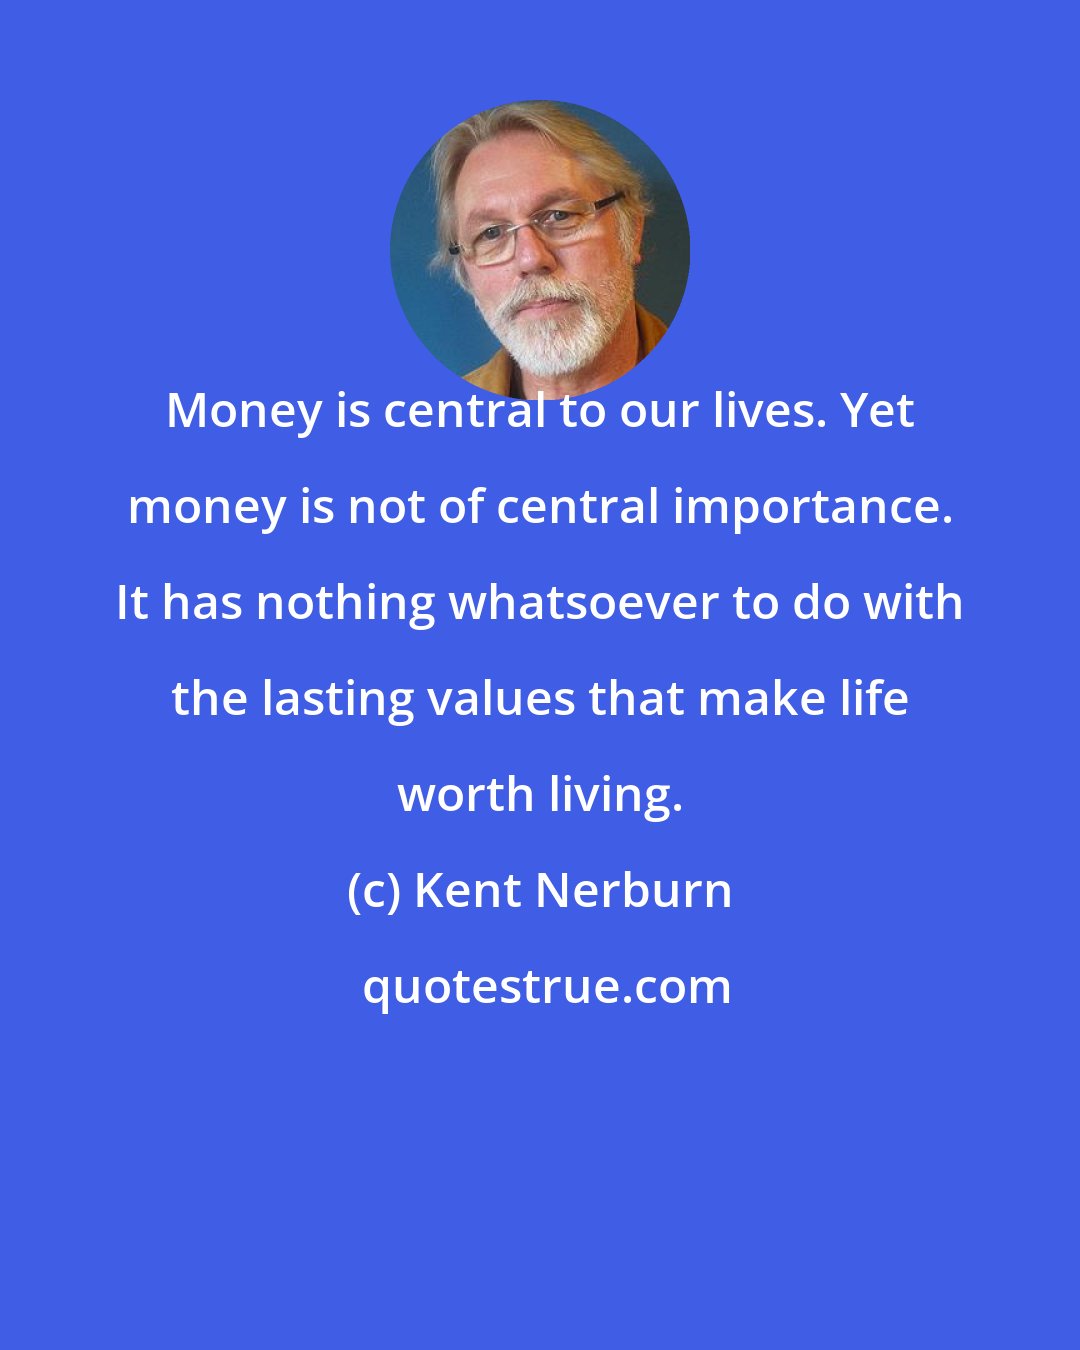 Kent Nerburn: Money is central to our lives. Yet money is not of central importance. It has nothing whatsoever to do with the lasting values that make life worth living.